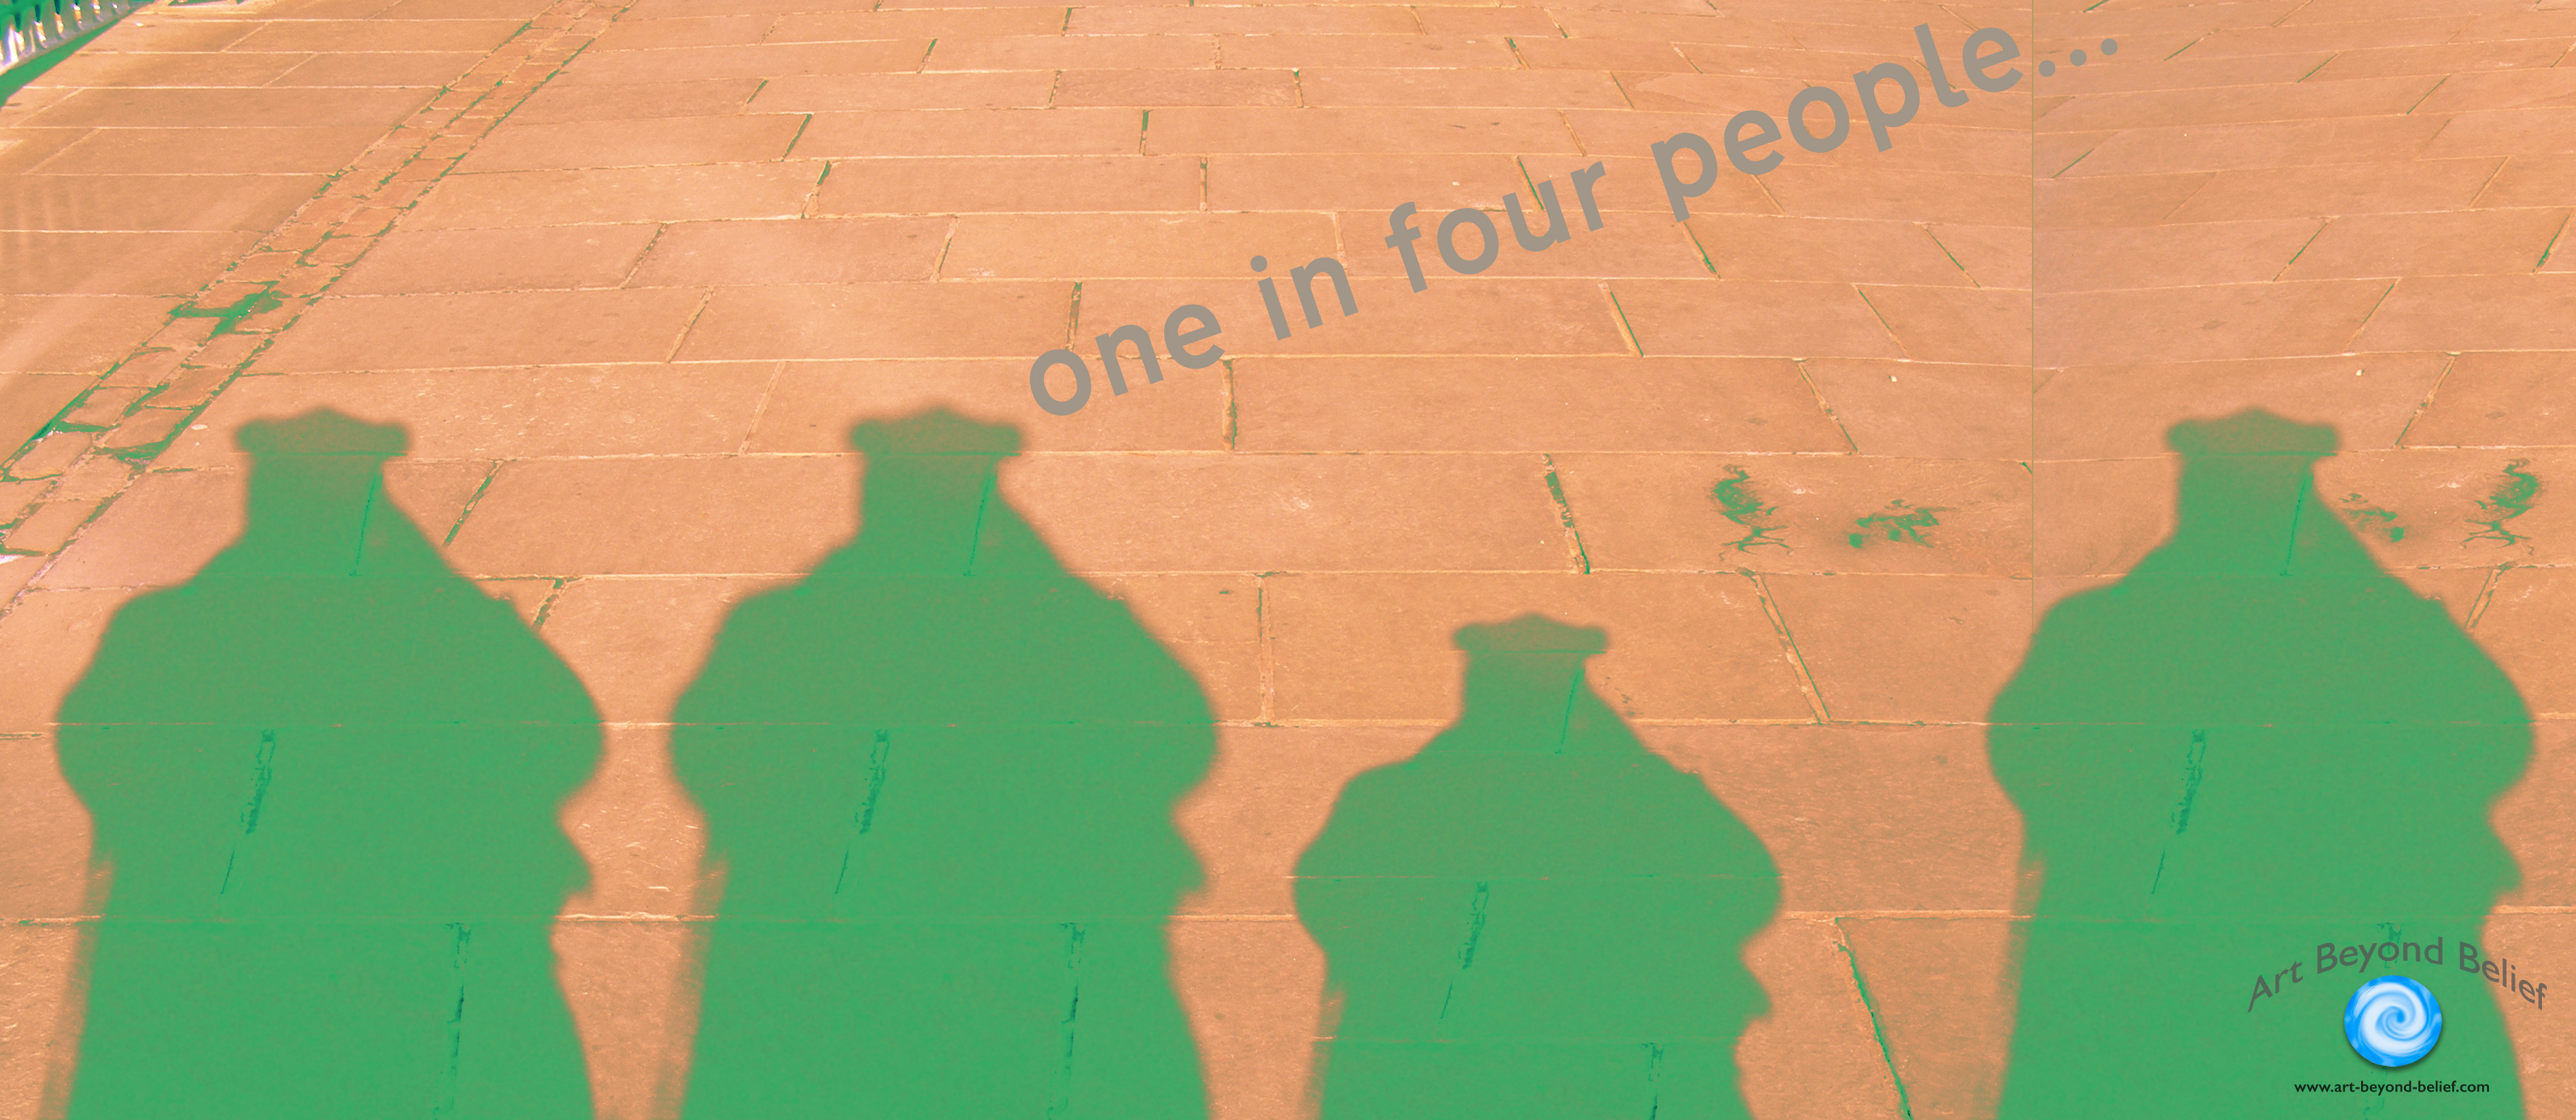 A picture of four peoples shadows, edited to look green.